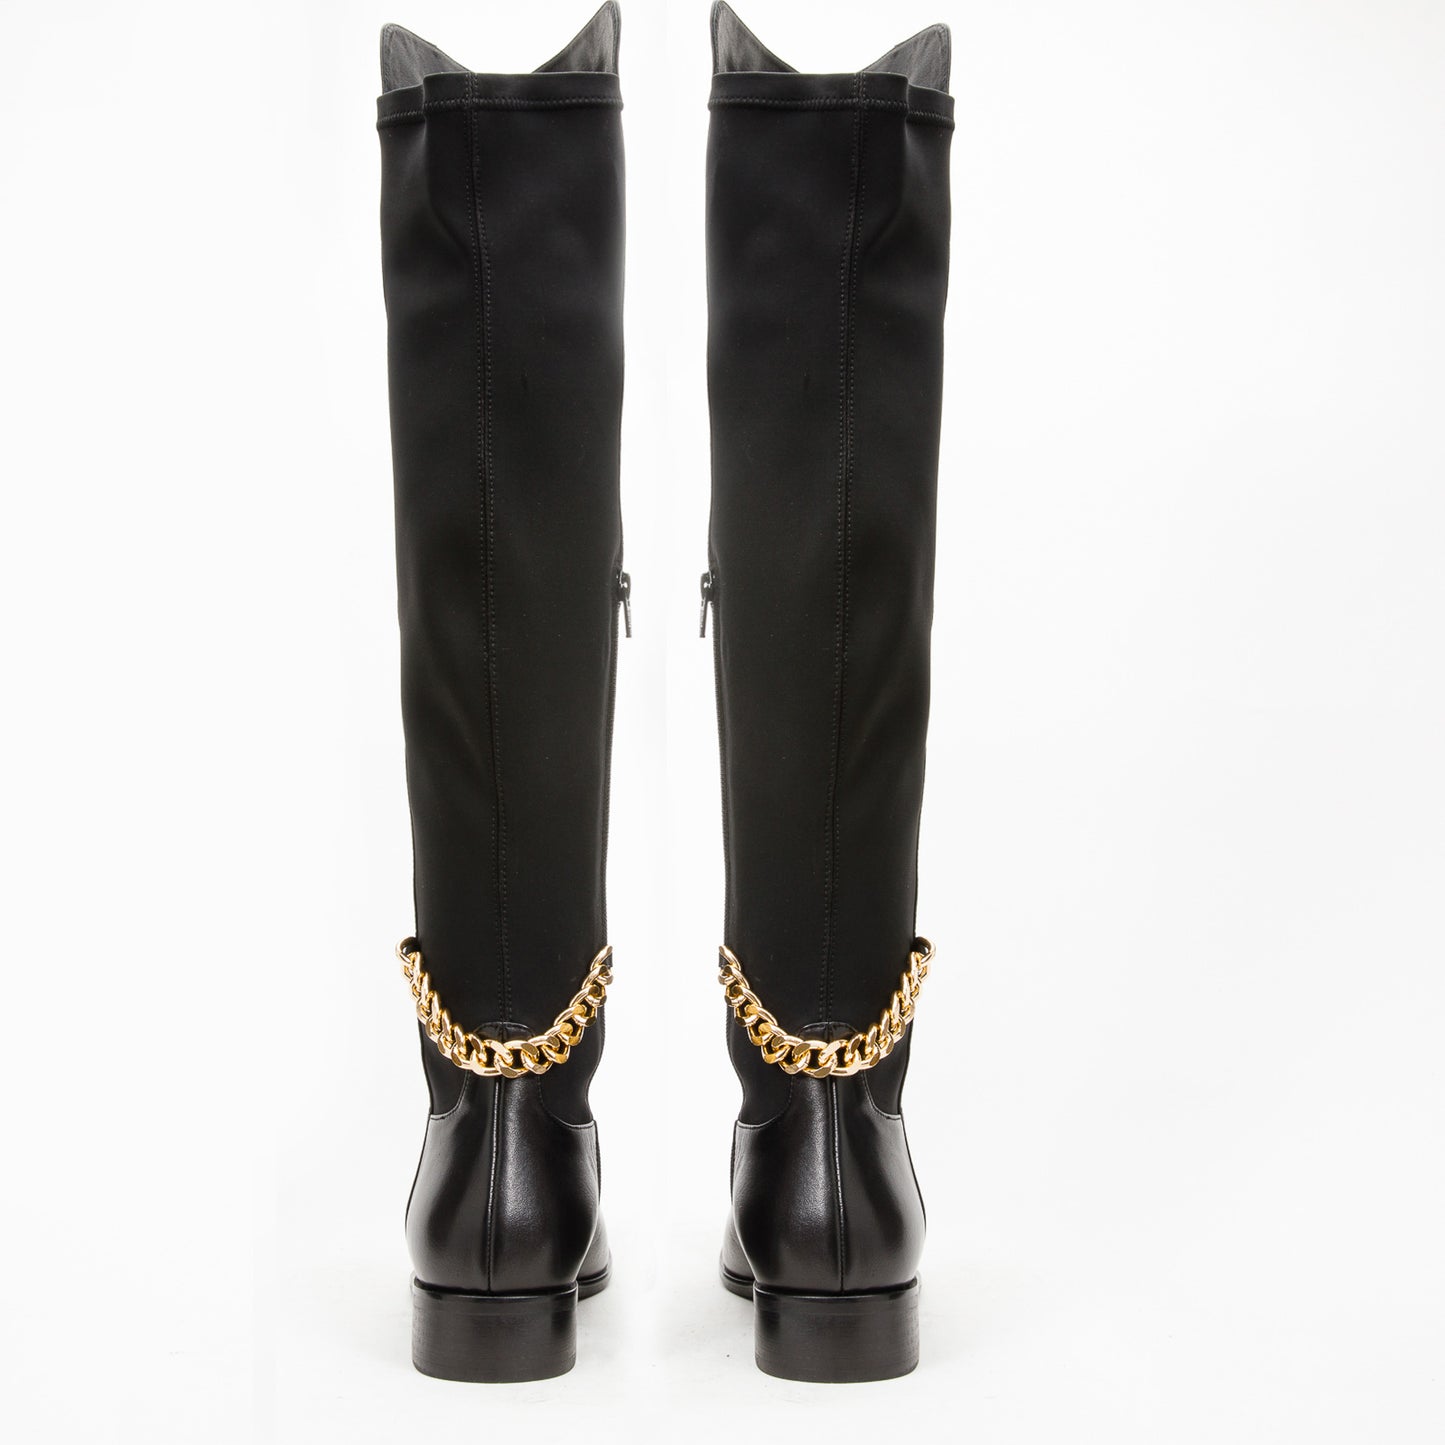 The Tallin Black Leather Knee High Women Boot